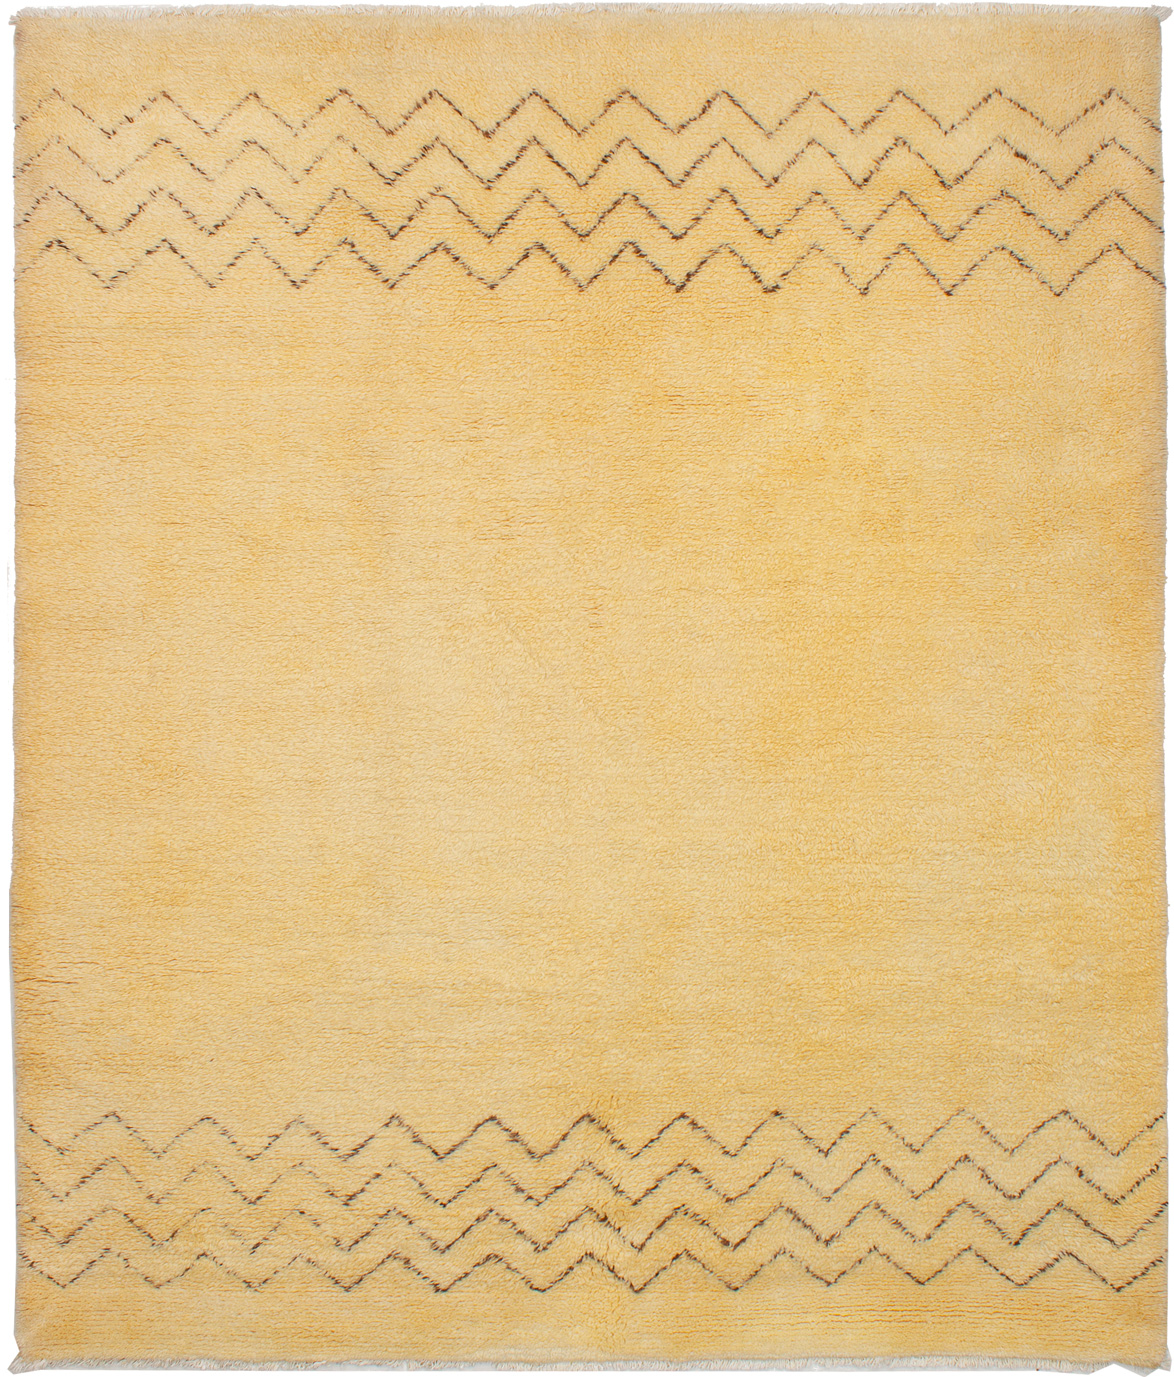 Hand-knotted Royal Maroc Cream Wool Rug 8'1" x 9'6" Size: 8'1" x 9'6"  